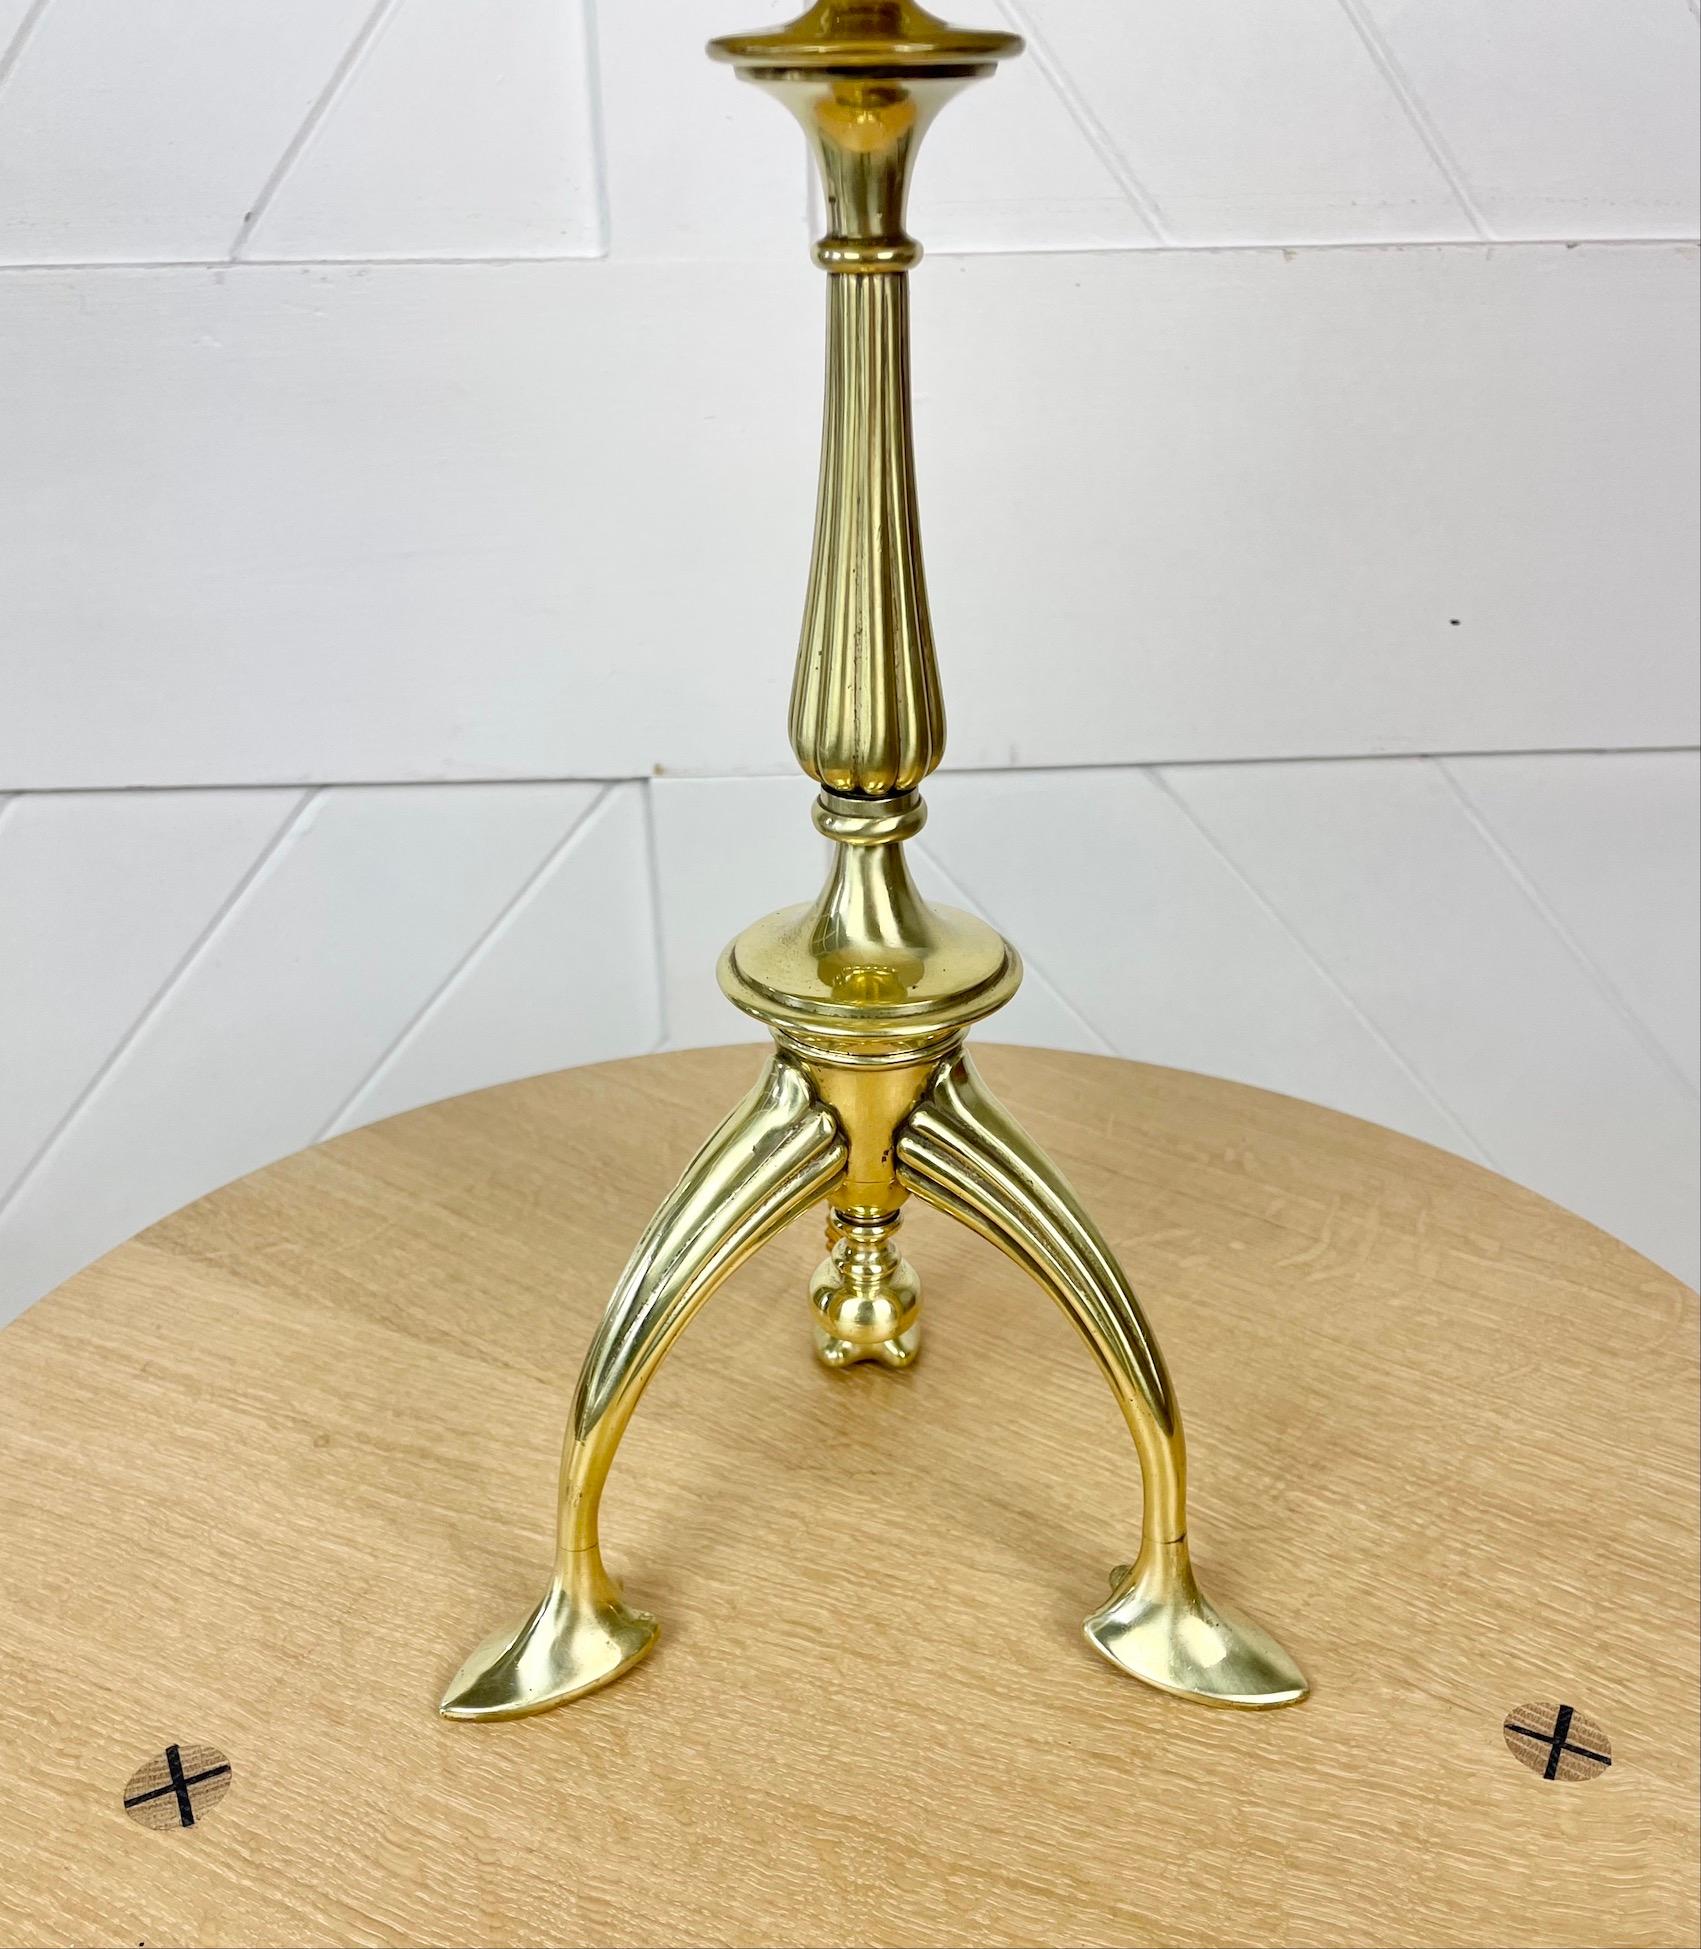 A very stylish brass Arts and Crafts table lamp
The feet are spade shaped, very typical of the period
This lamp is offered with a natural linen shade
The measurements of the lamp without the shade are:
Diameter 20cm   Height 40cm
Circa 1900